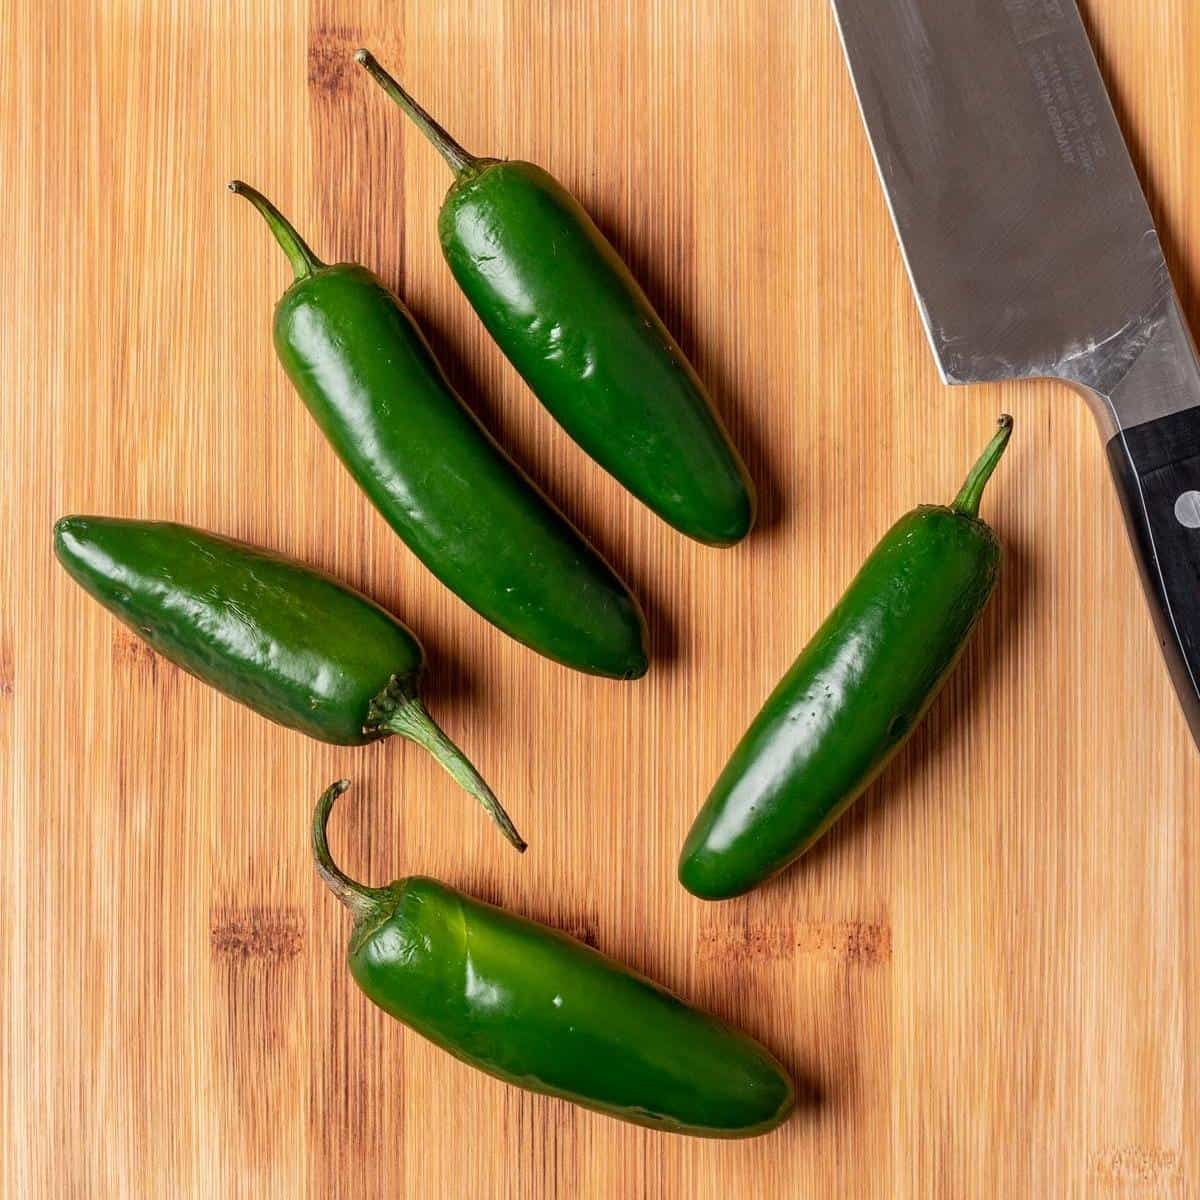 How To Cut Jalapeños - Your Home, Made Healthy